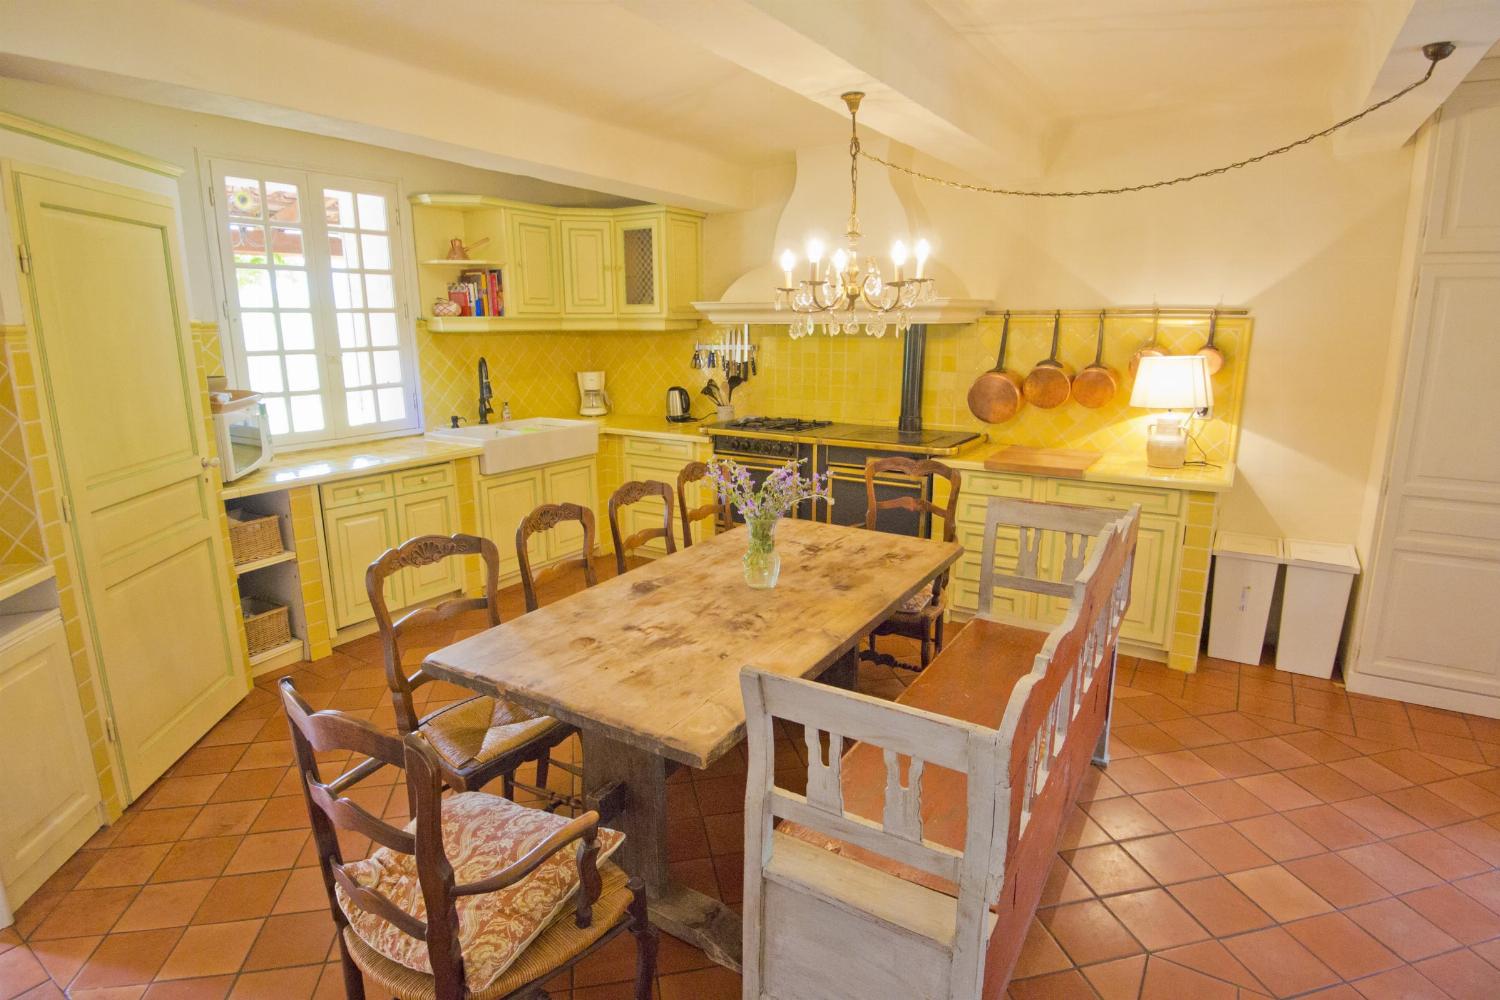 Kitchen | Rental home in Provence